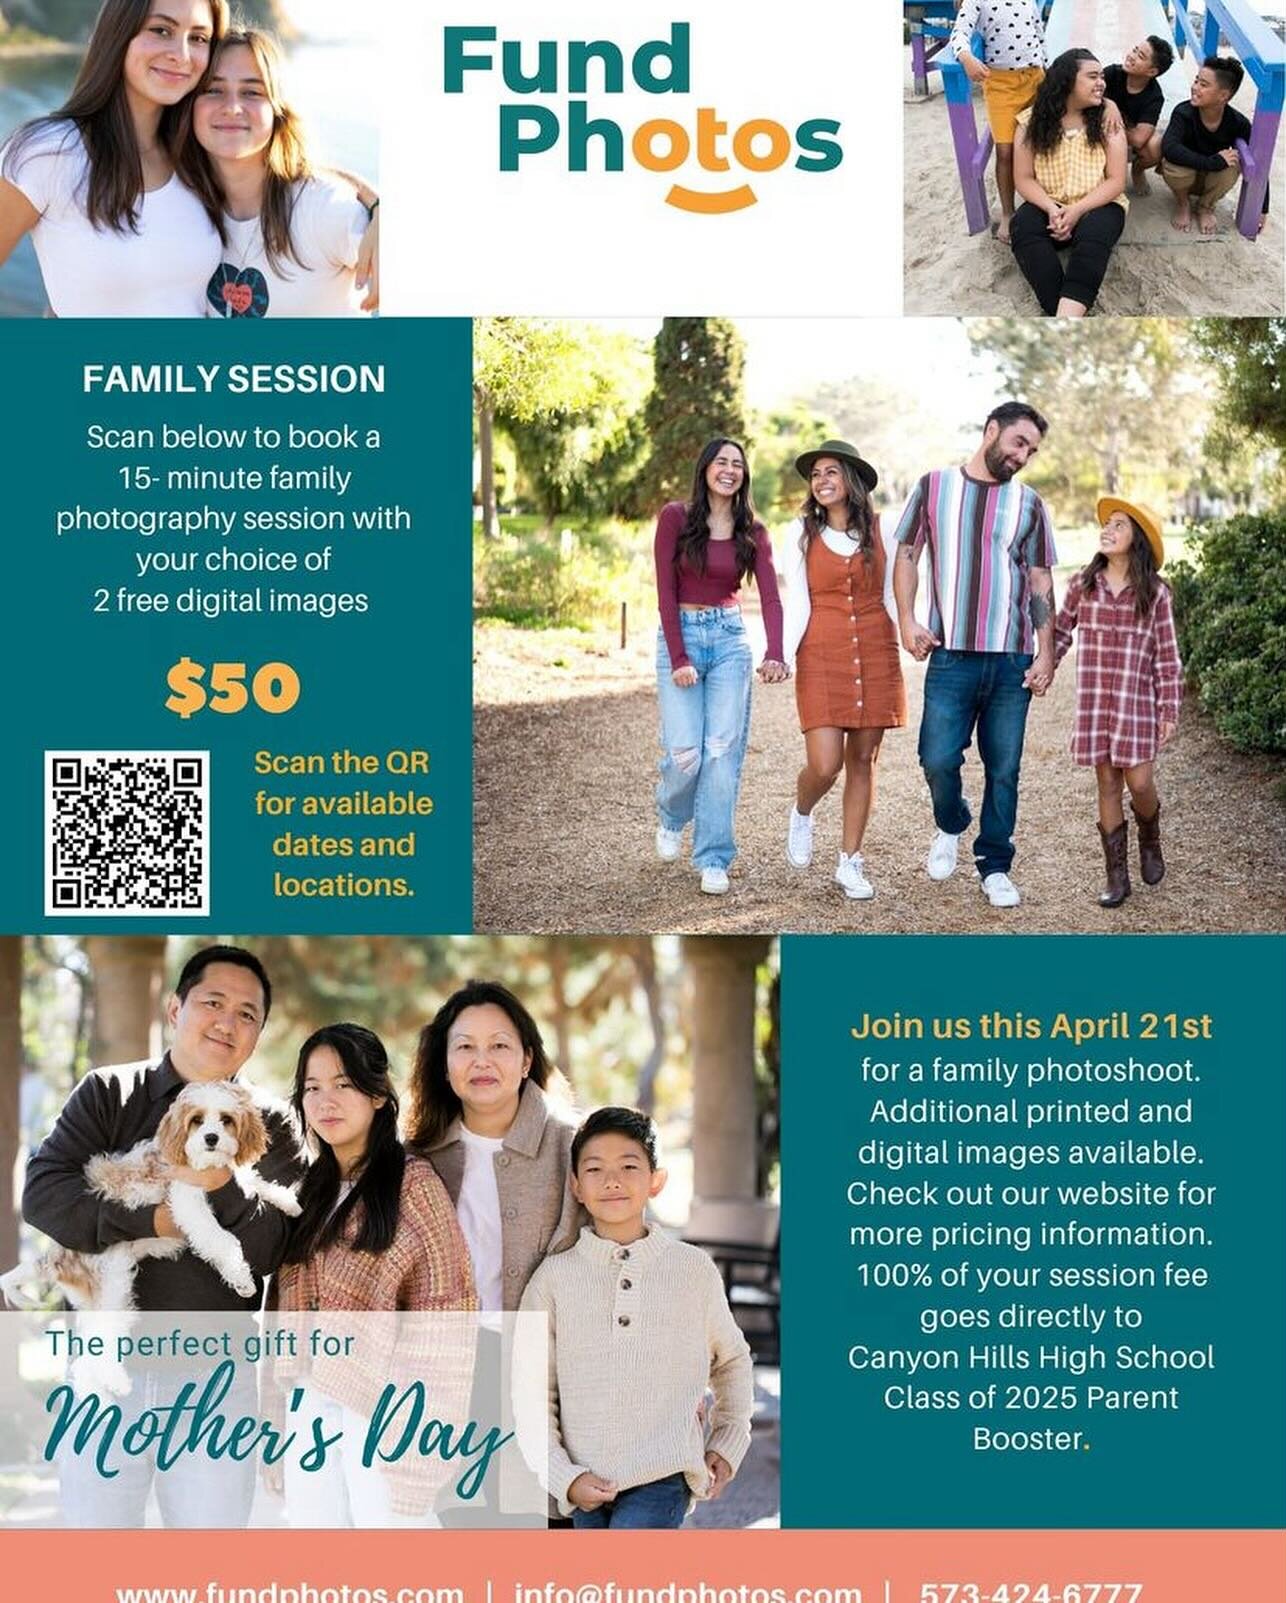 The Canyon Hills Class of 2025 are having TWO events to raise money for their class! By getting some family photos or some BJs on April 9th, you&rsquo;ll help these Juniors fundraise for all their senior activities next year!